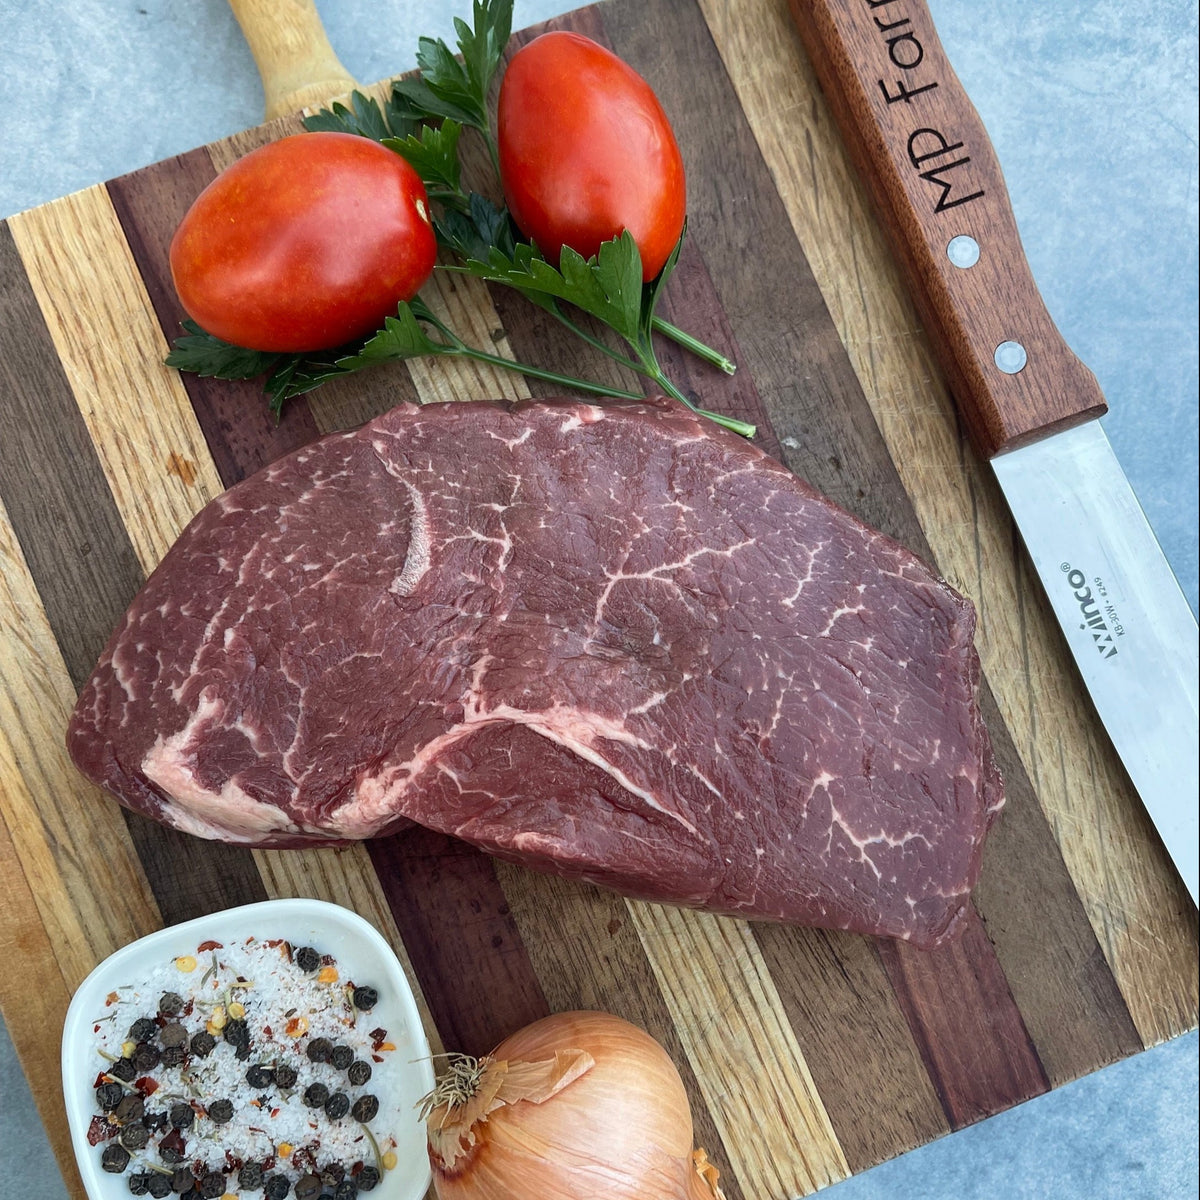 raw sirloin steak with herbs and tomatoes